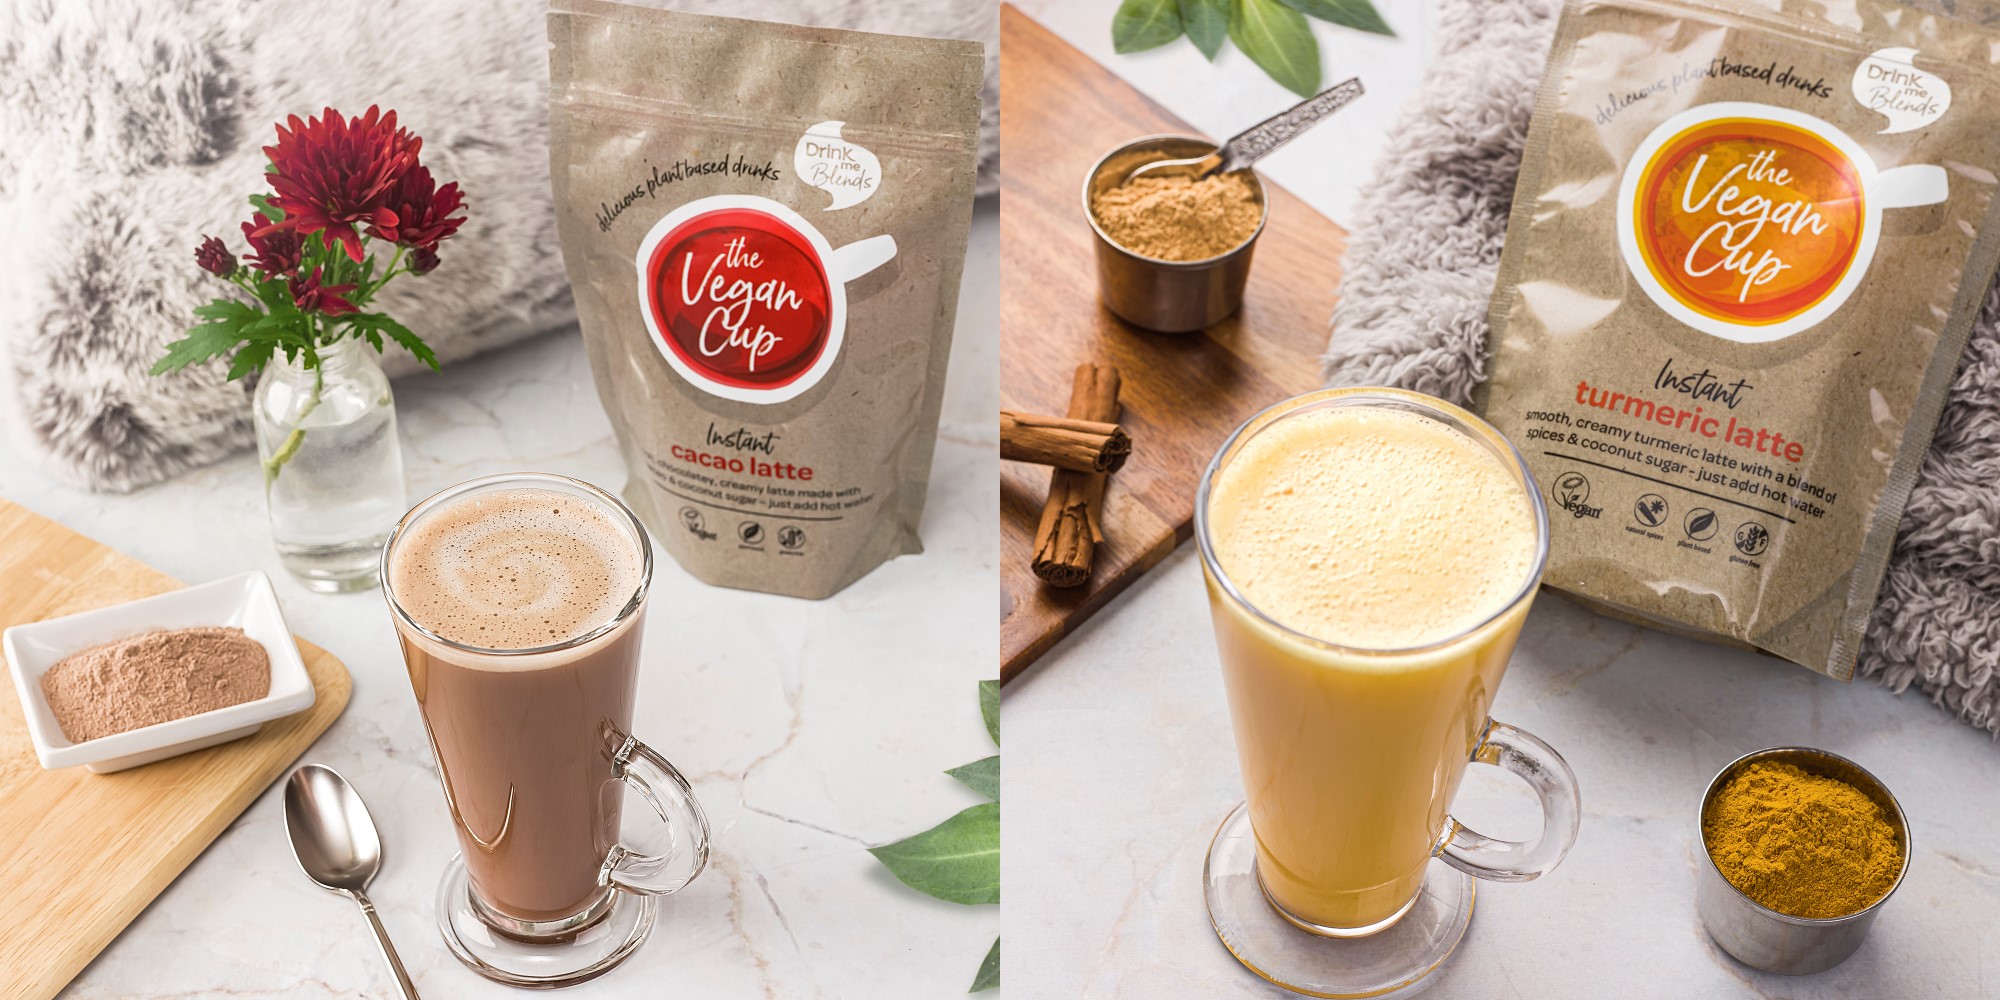 Introducing The Vegan Cup from Drink me Blends